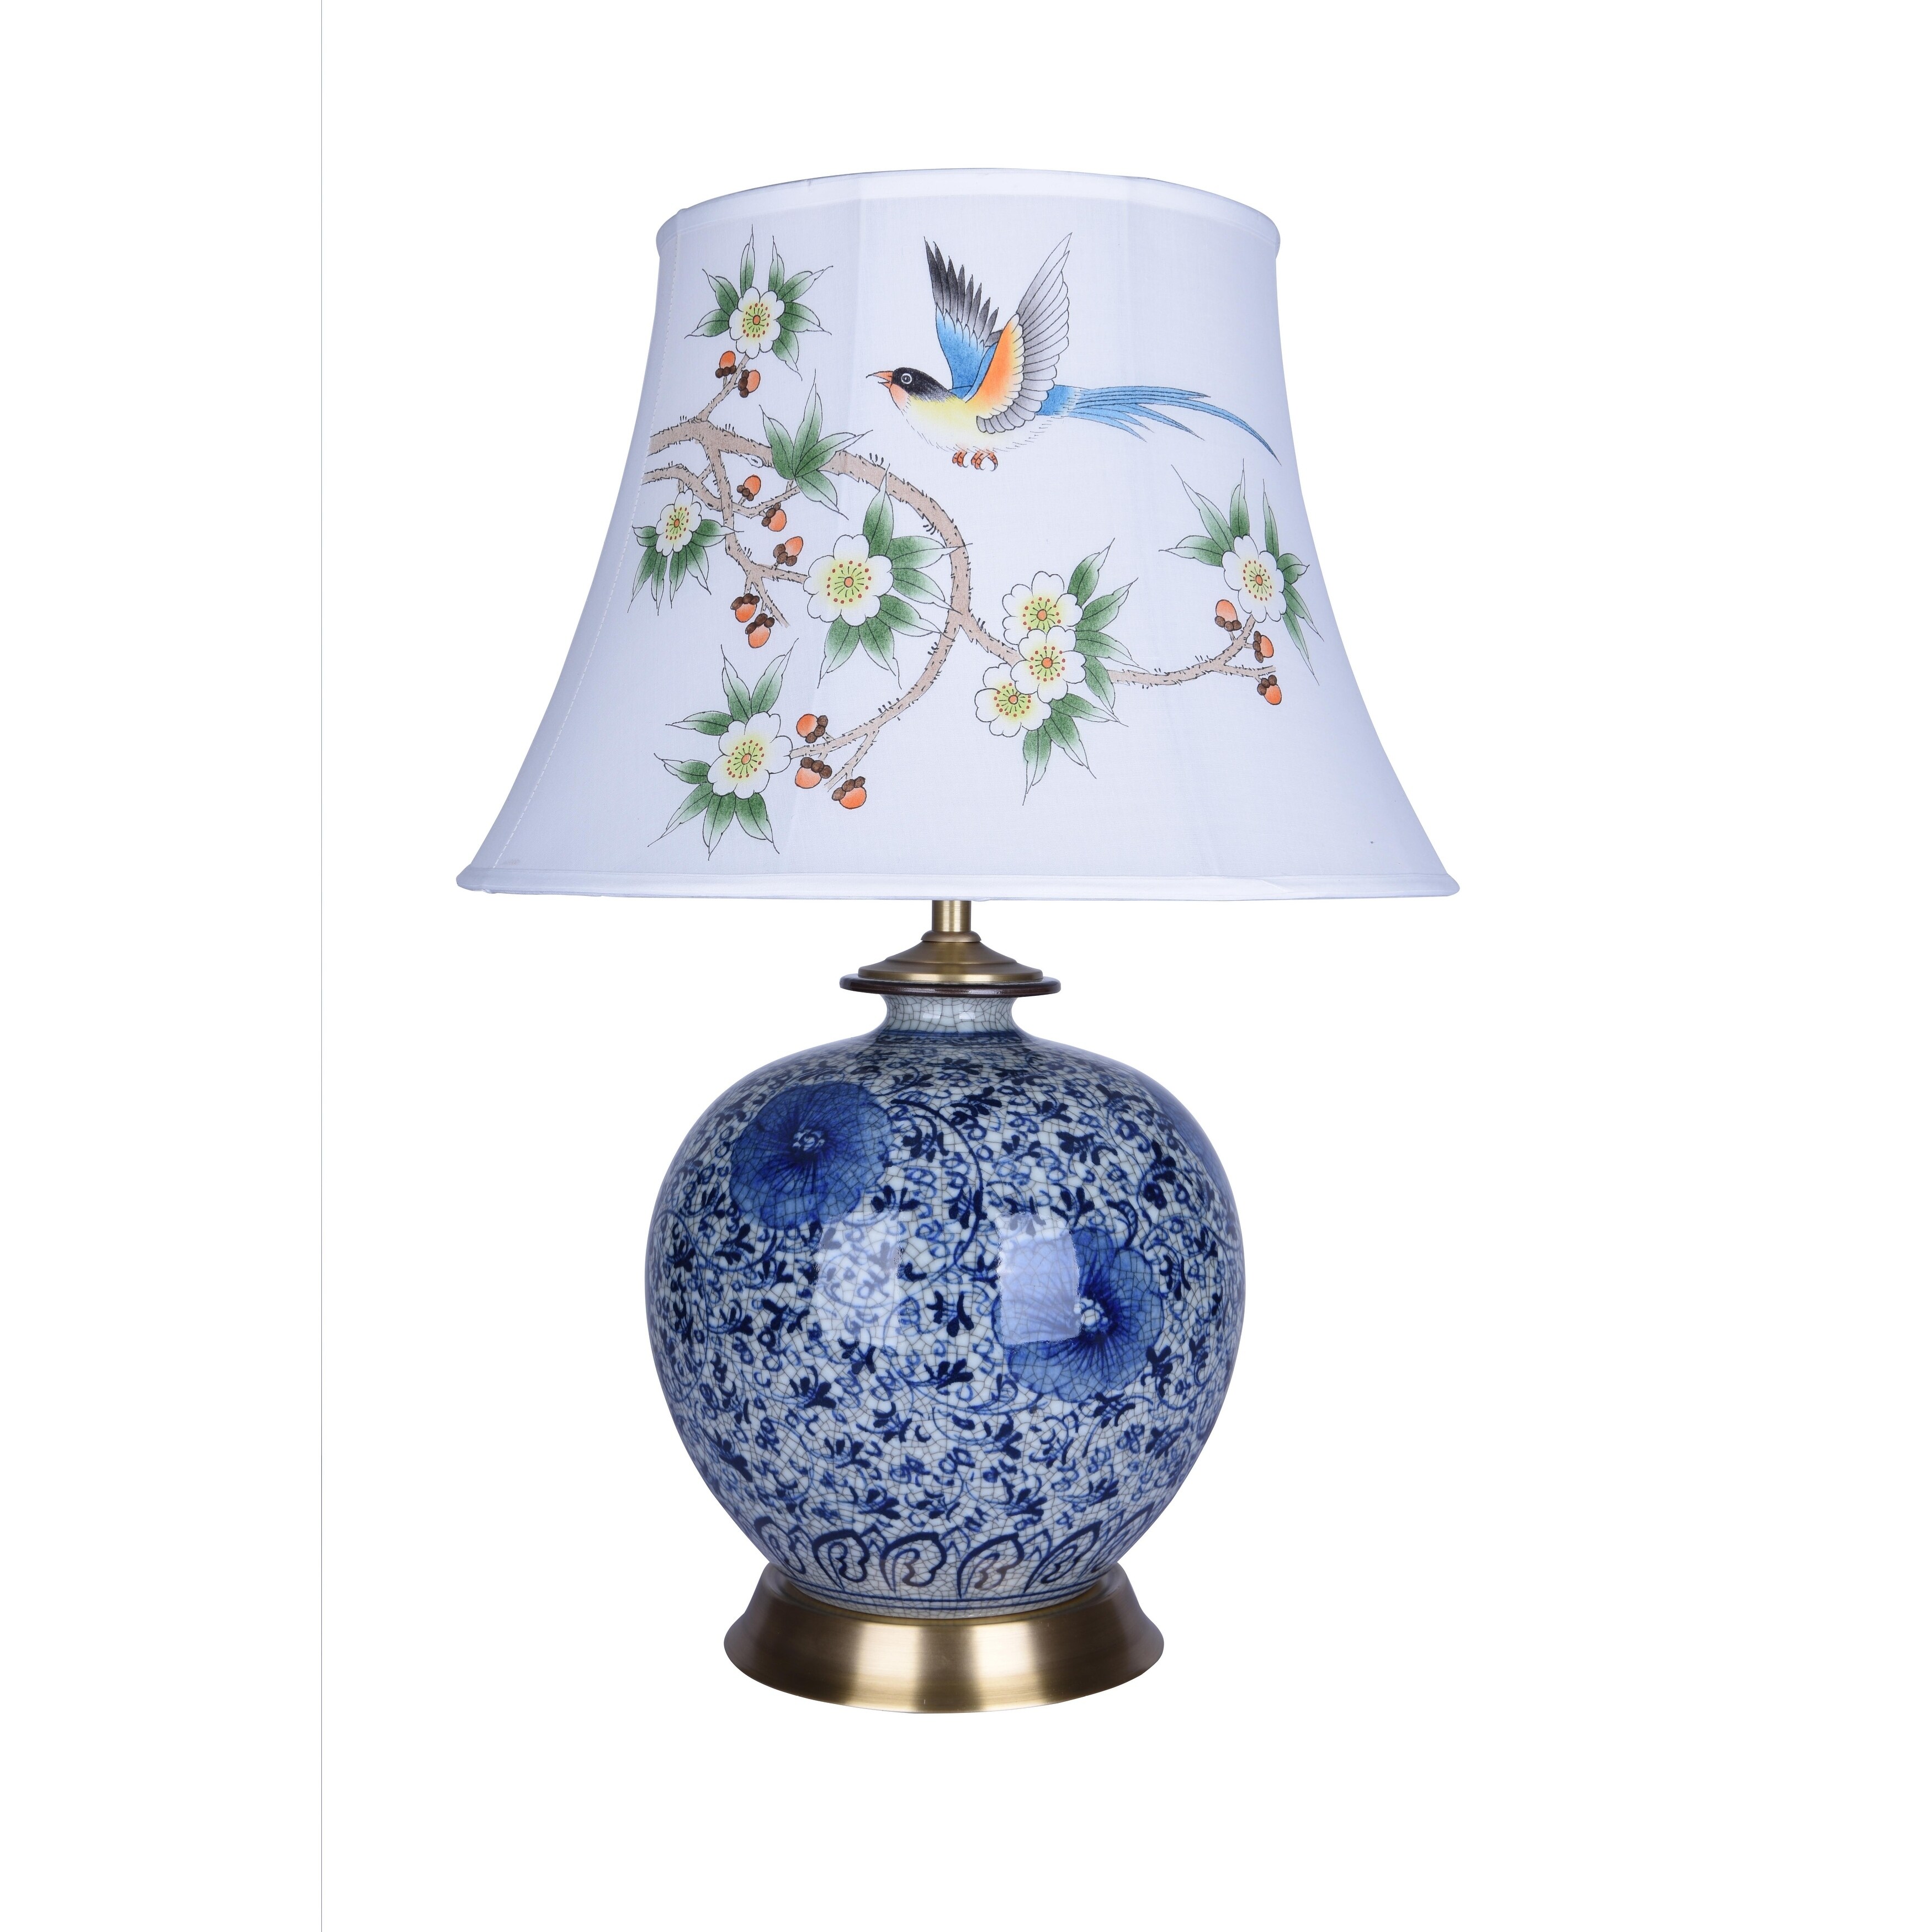 Shop Porcelain Base Table Lamp With Hand Painted On Sale Overstock 29344058,How To Update Old Kitchen Cabinets Without Replacing Them